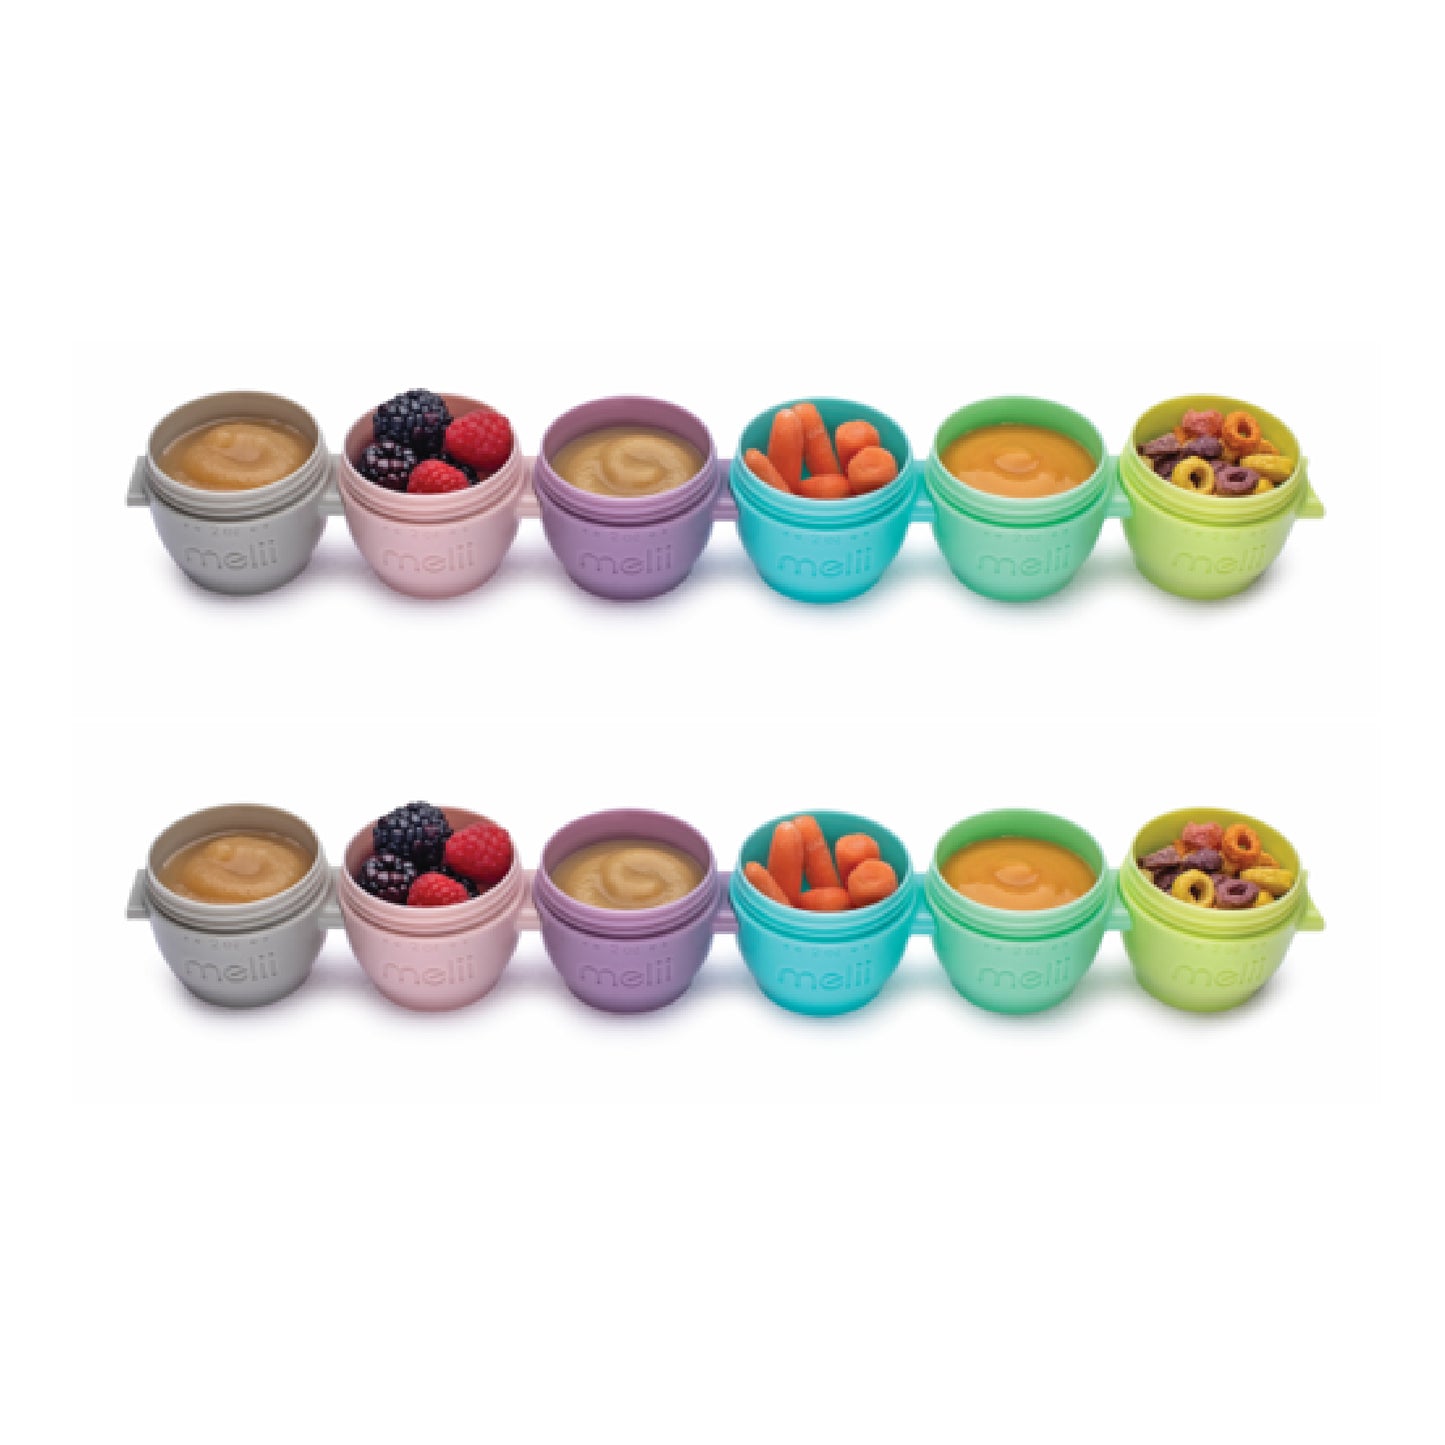 Melii Snap & Go Pods - Airtight & Leakproof Baby Food Containers - Baby Food Storage Pods for Effortless Mealtime, 2oz, Set of 12